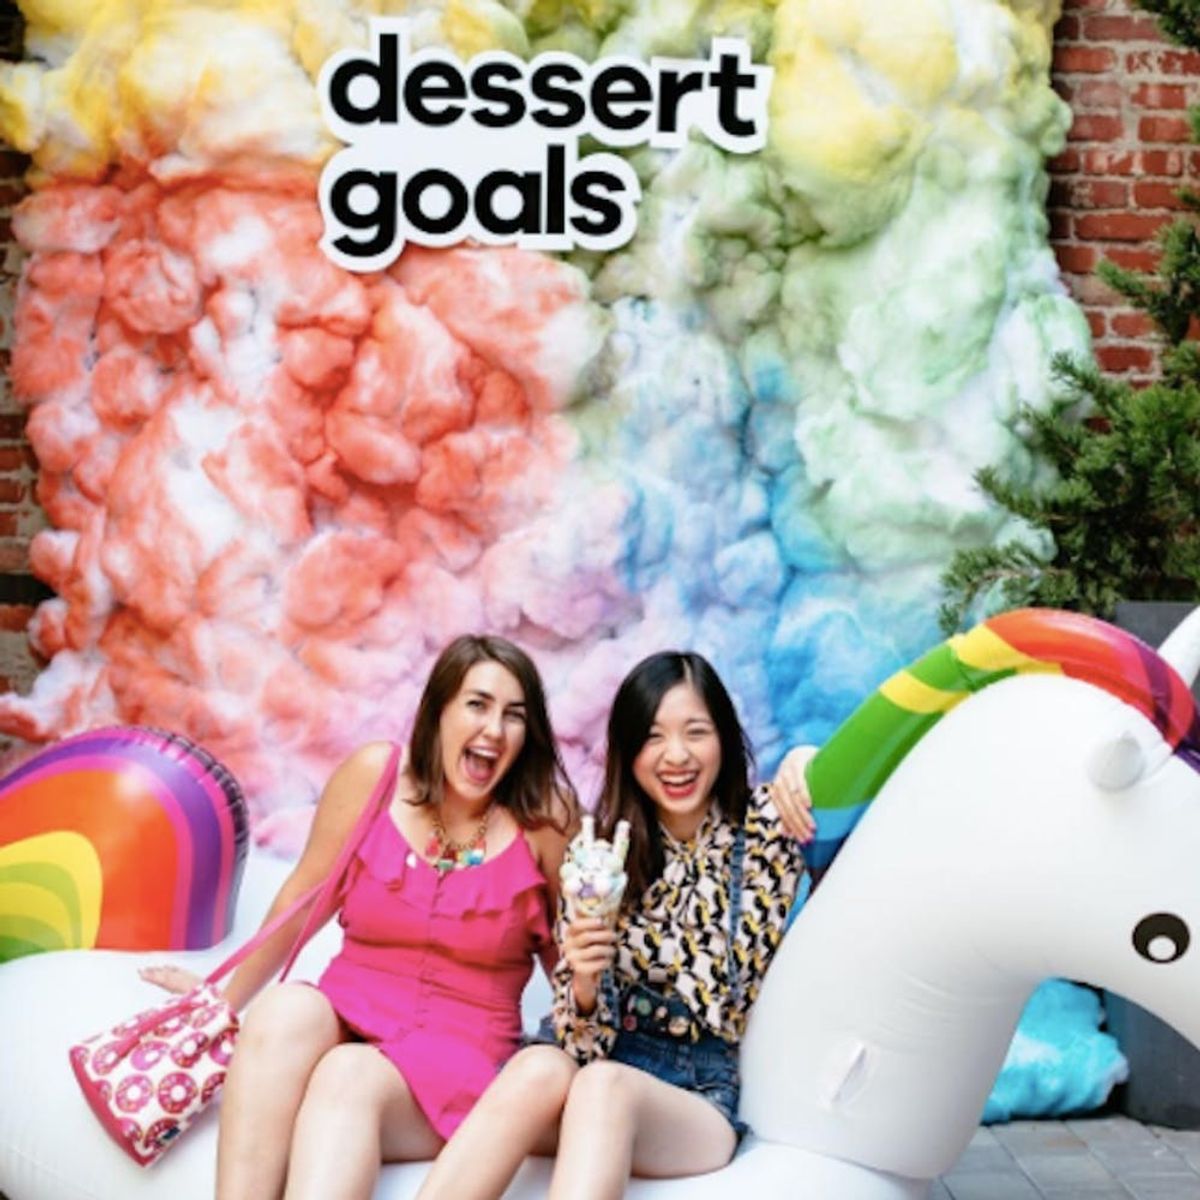 This Sweet Festival Is Every Dessert Lover’s Dream Come True